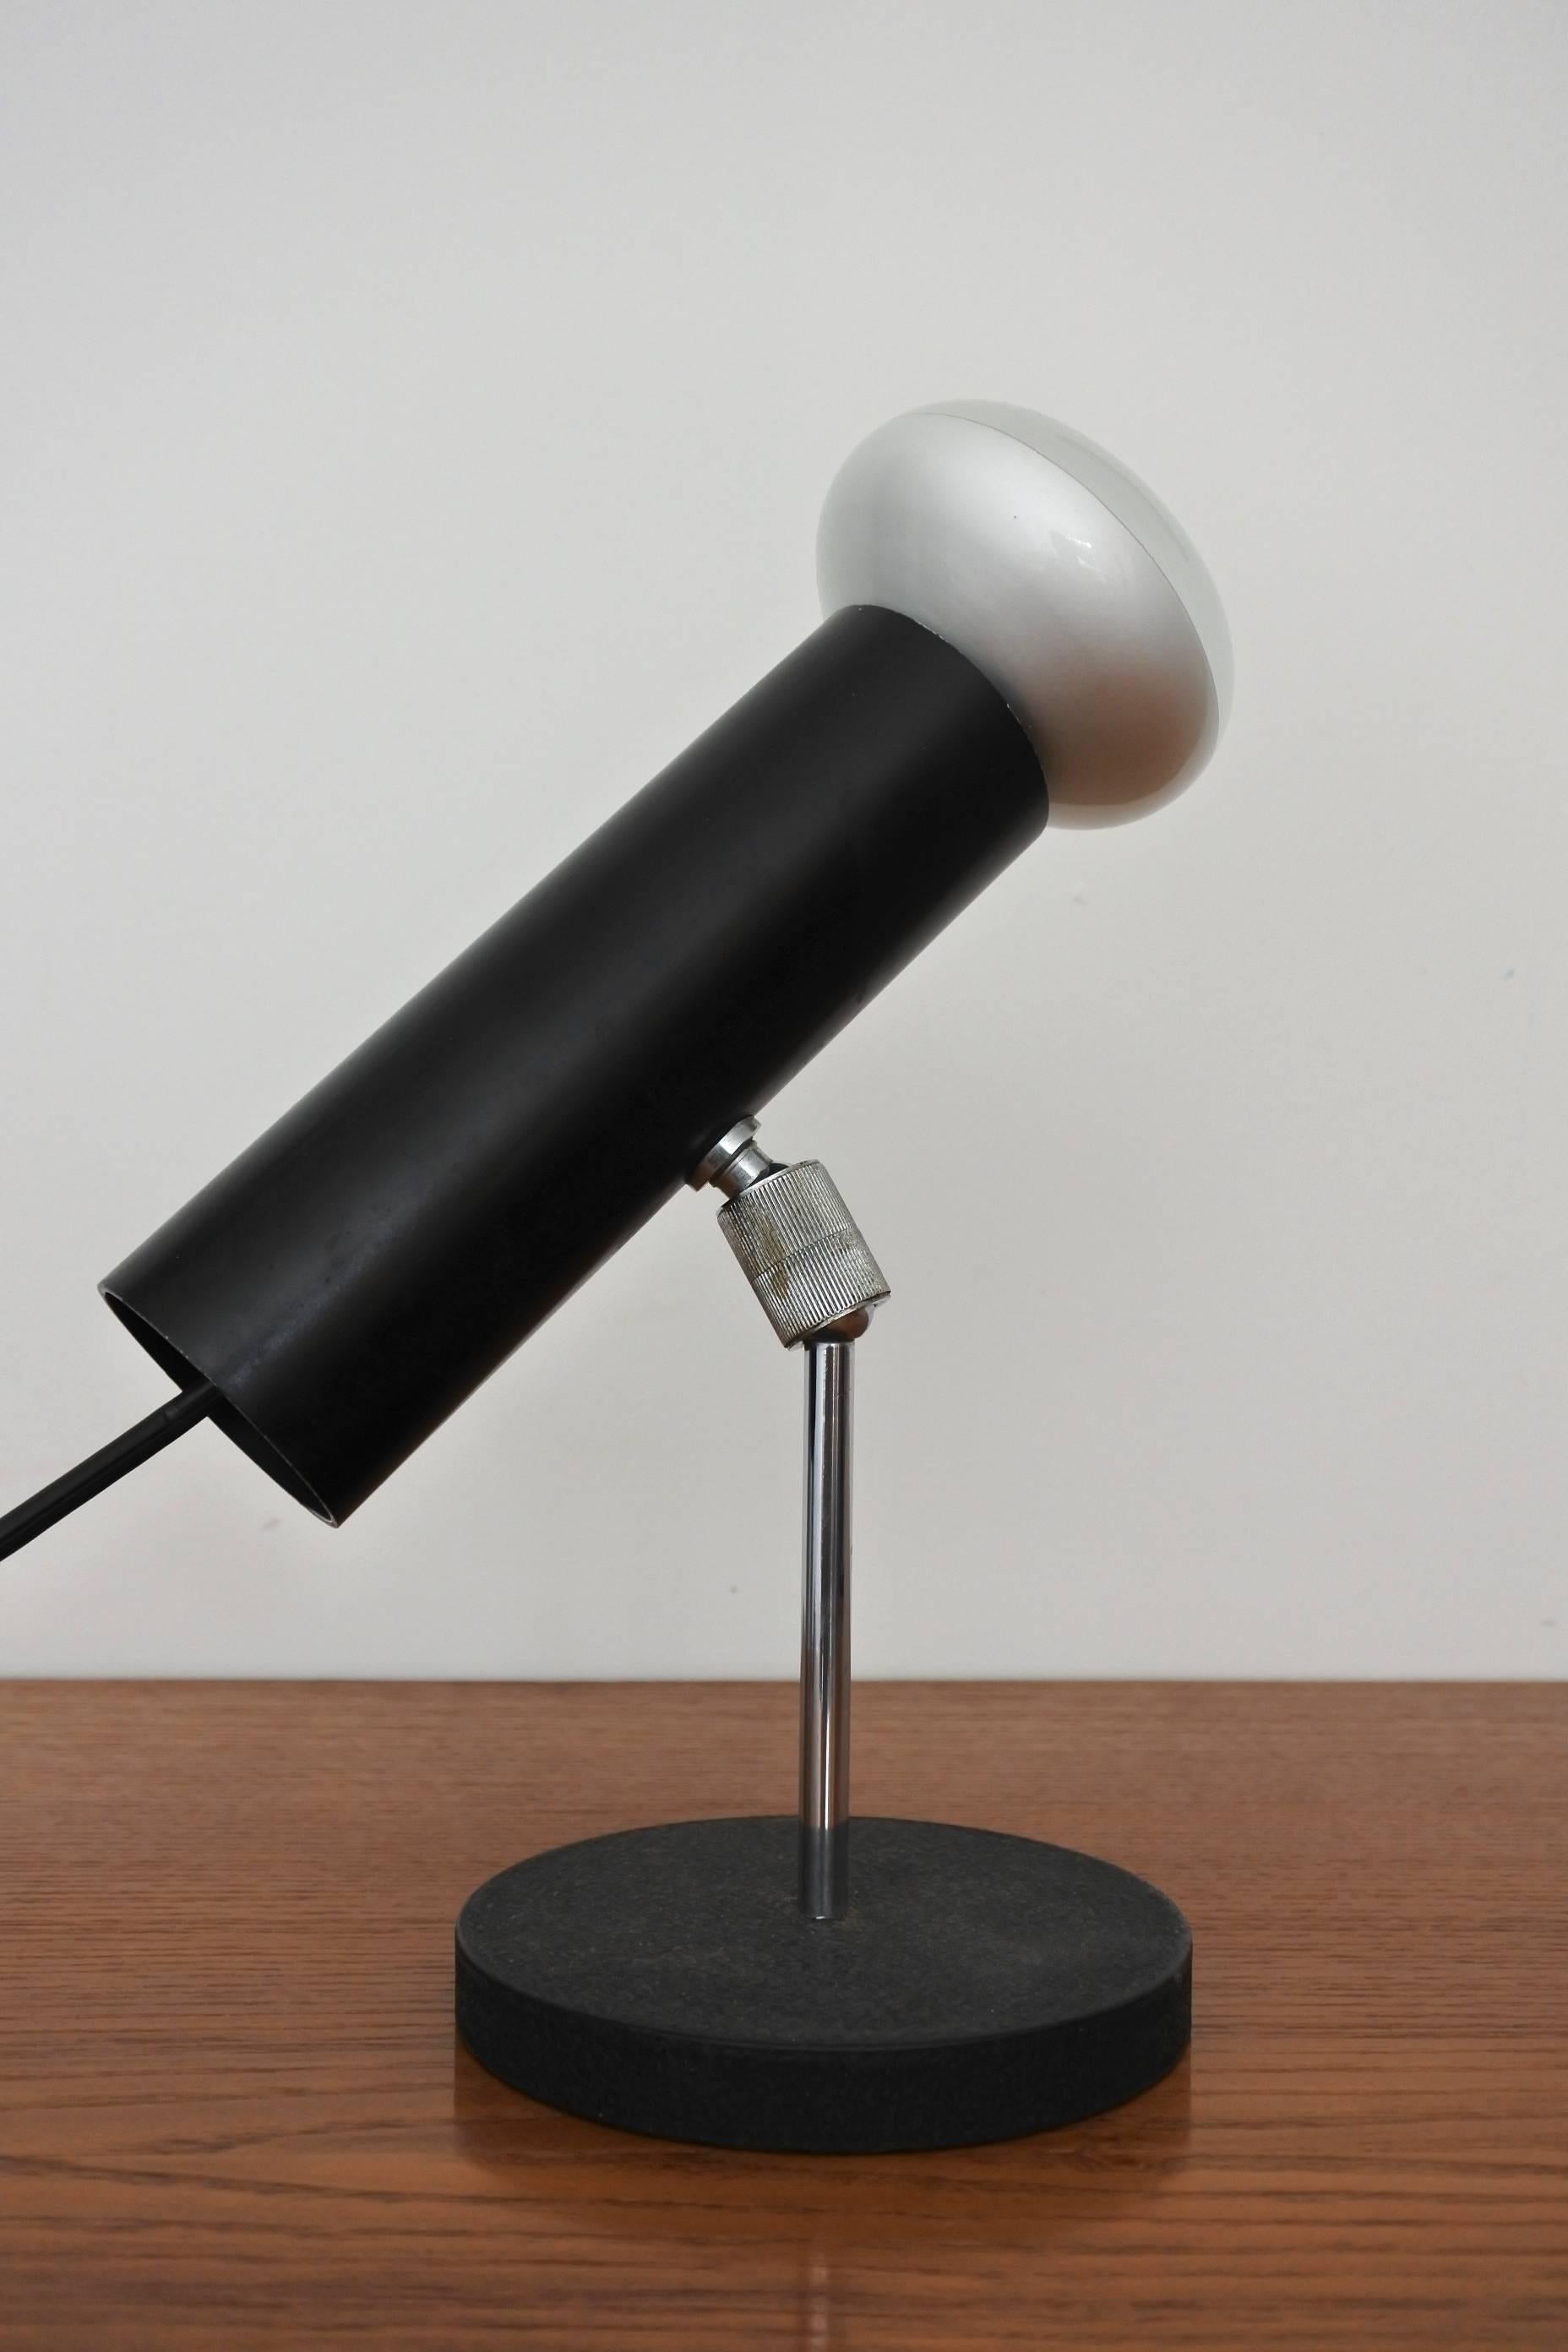 Midcentury table lamp by italian designer Gino Sarfatti. Edited by Arteluce in 1956.
Black lacquered metal and chromed metal.
The lamp can be orientated in all directions.
This lamp, model 568, is documented in the book 